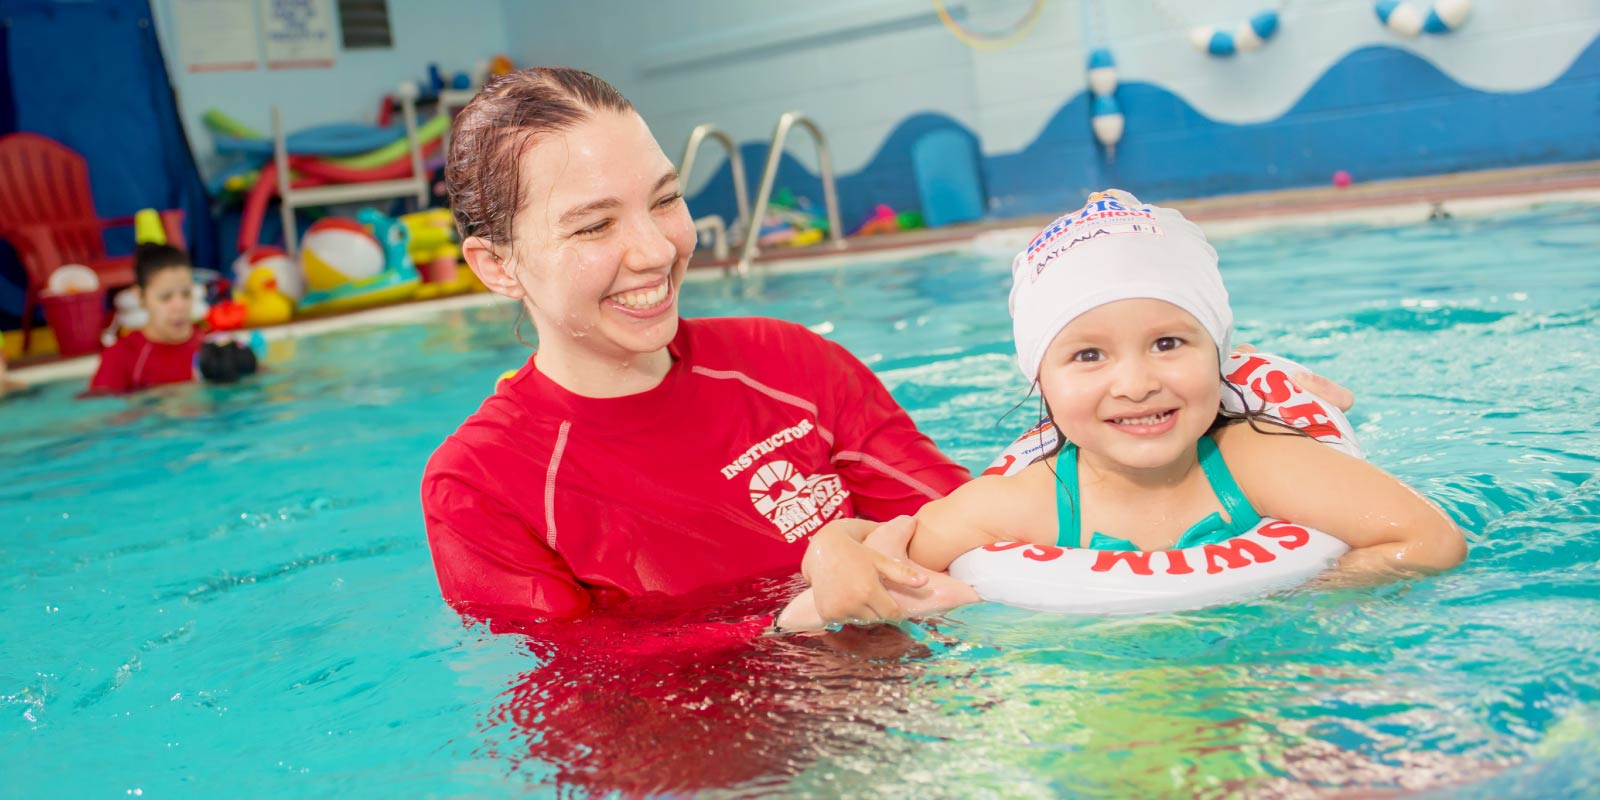 Little girl smiling while taking swim lessons from a British Swim School instructor